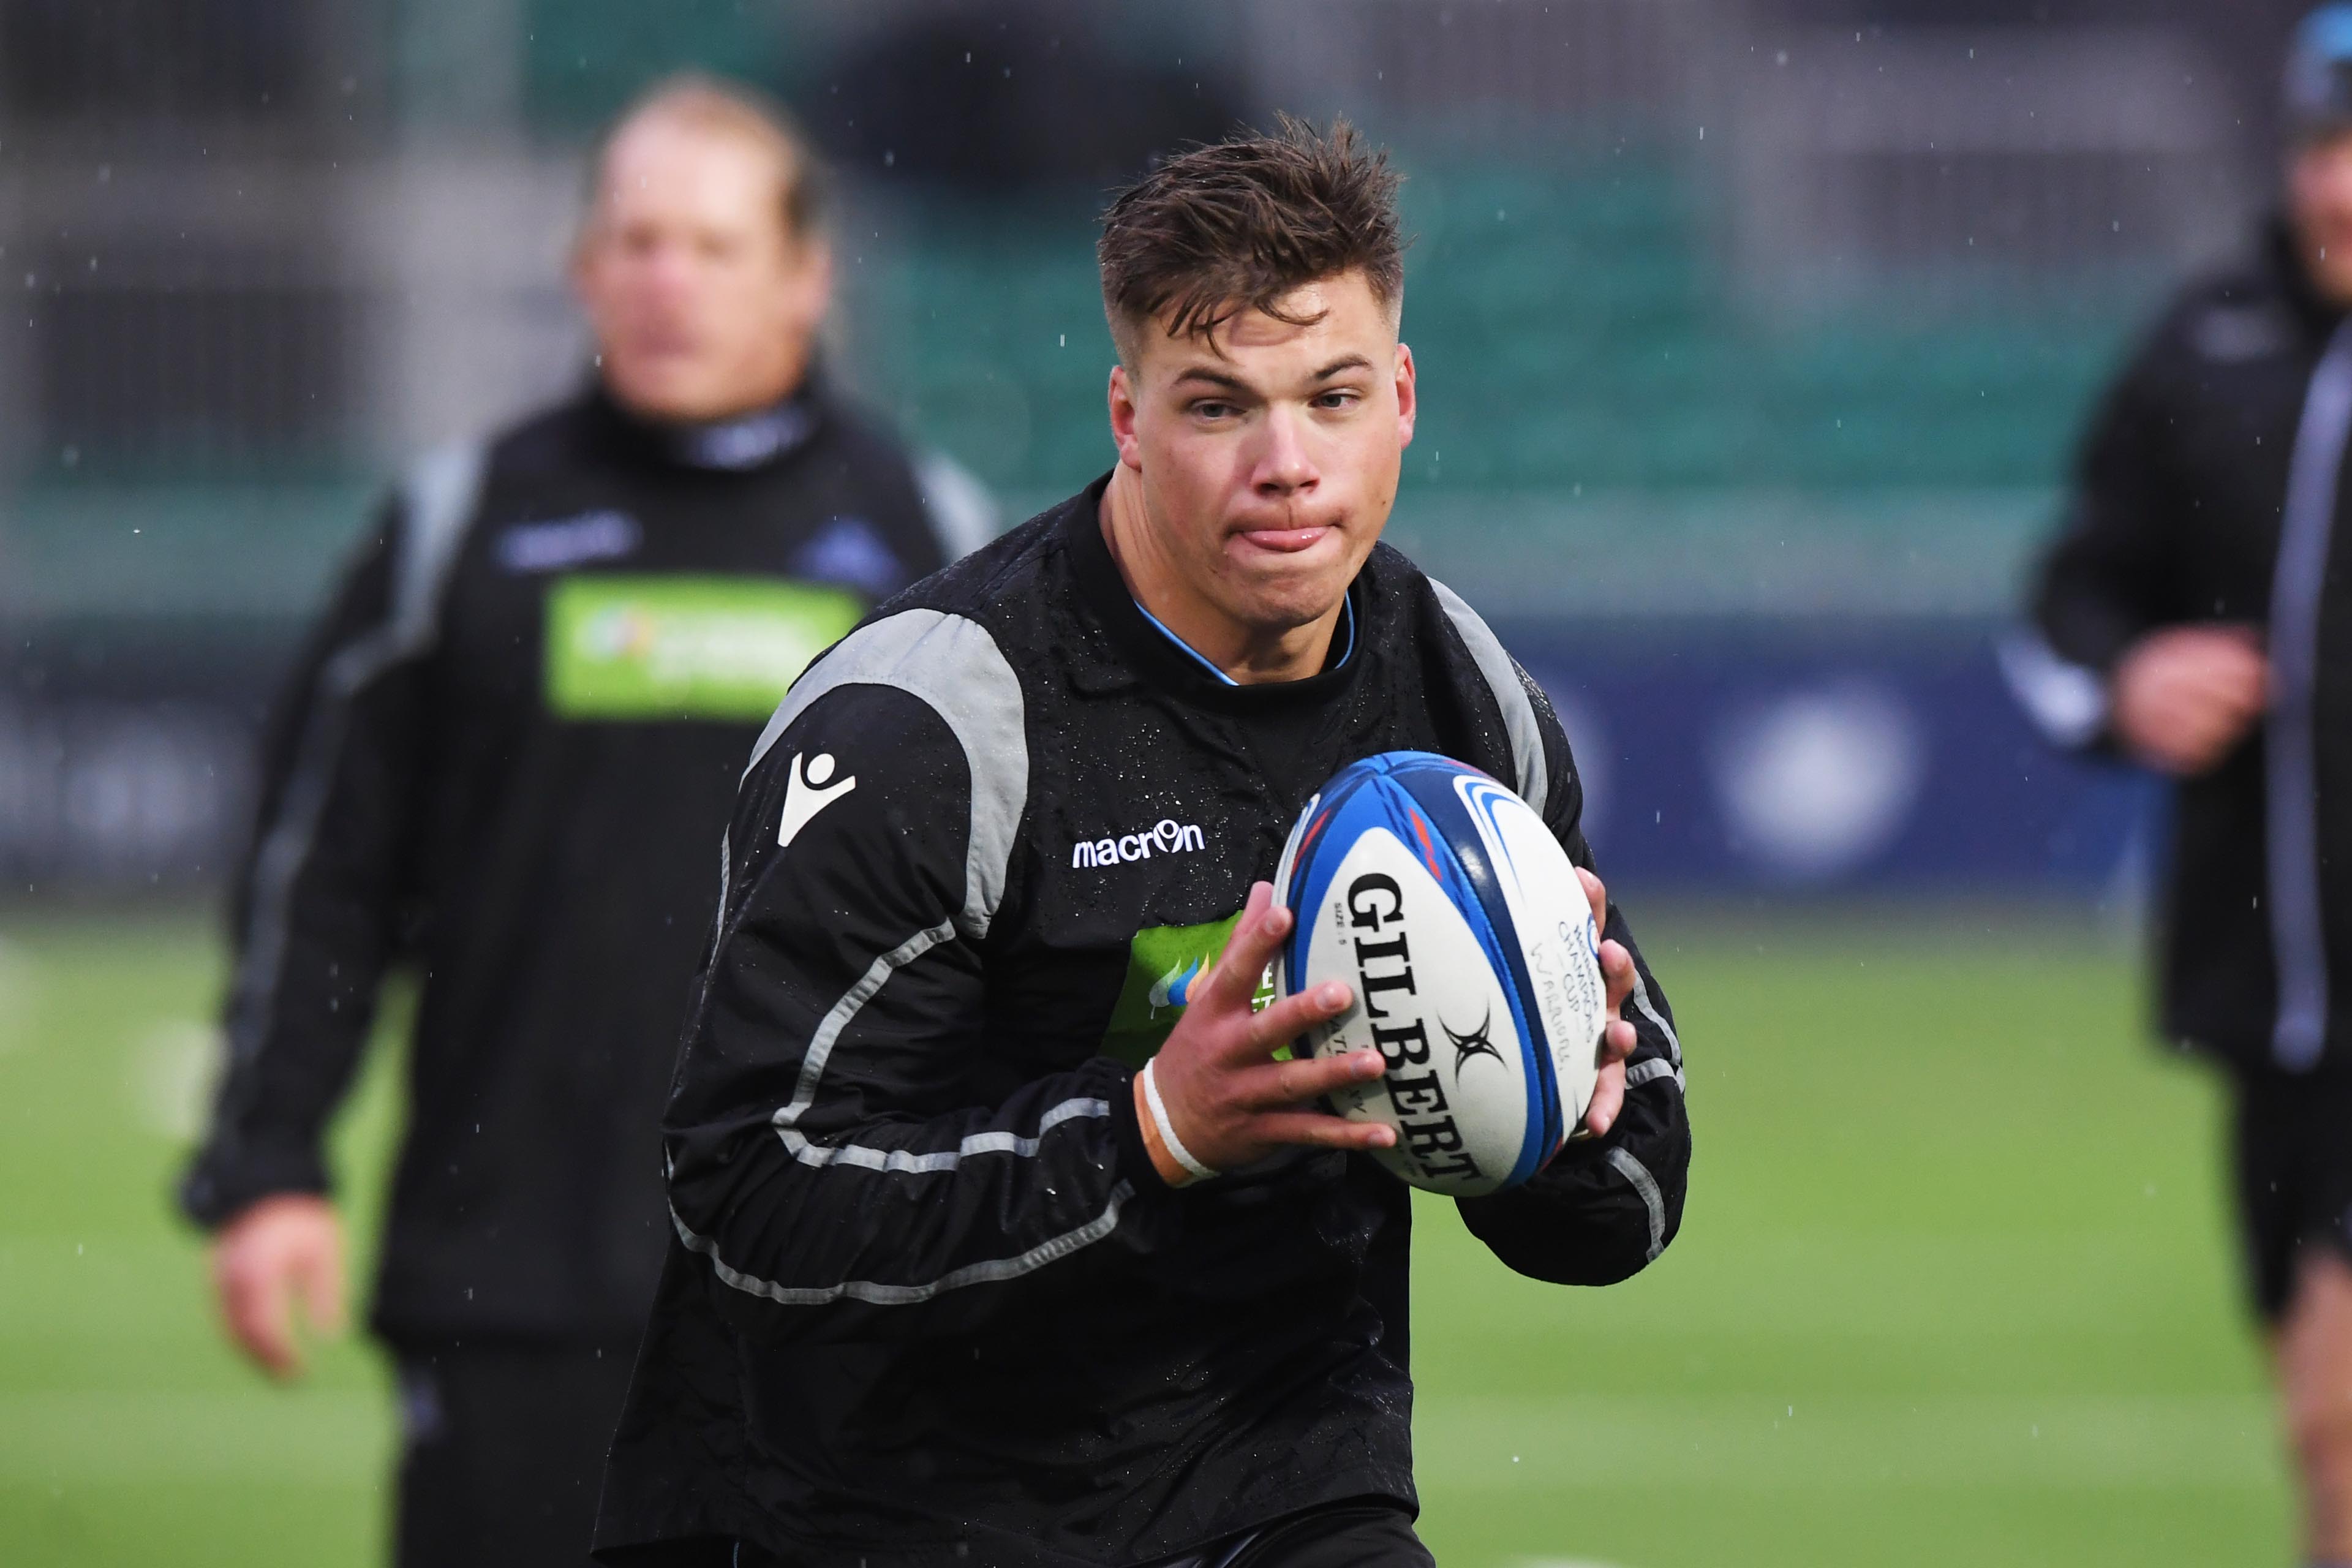 Glasgow Warriors' Huw Jones is going to see plenty of action at full-back.